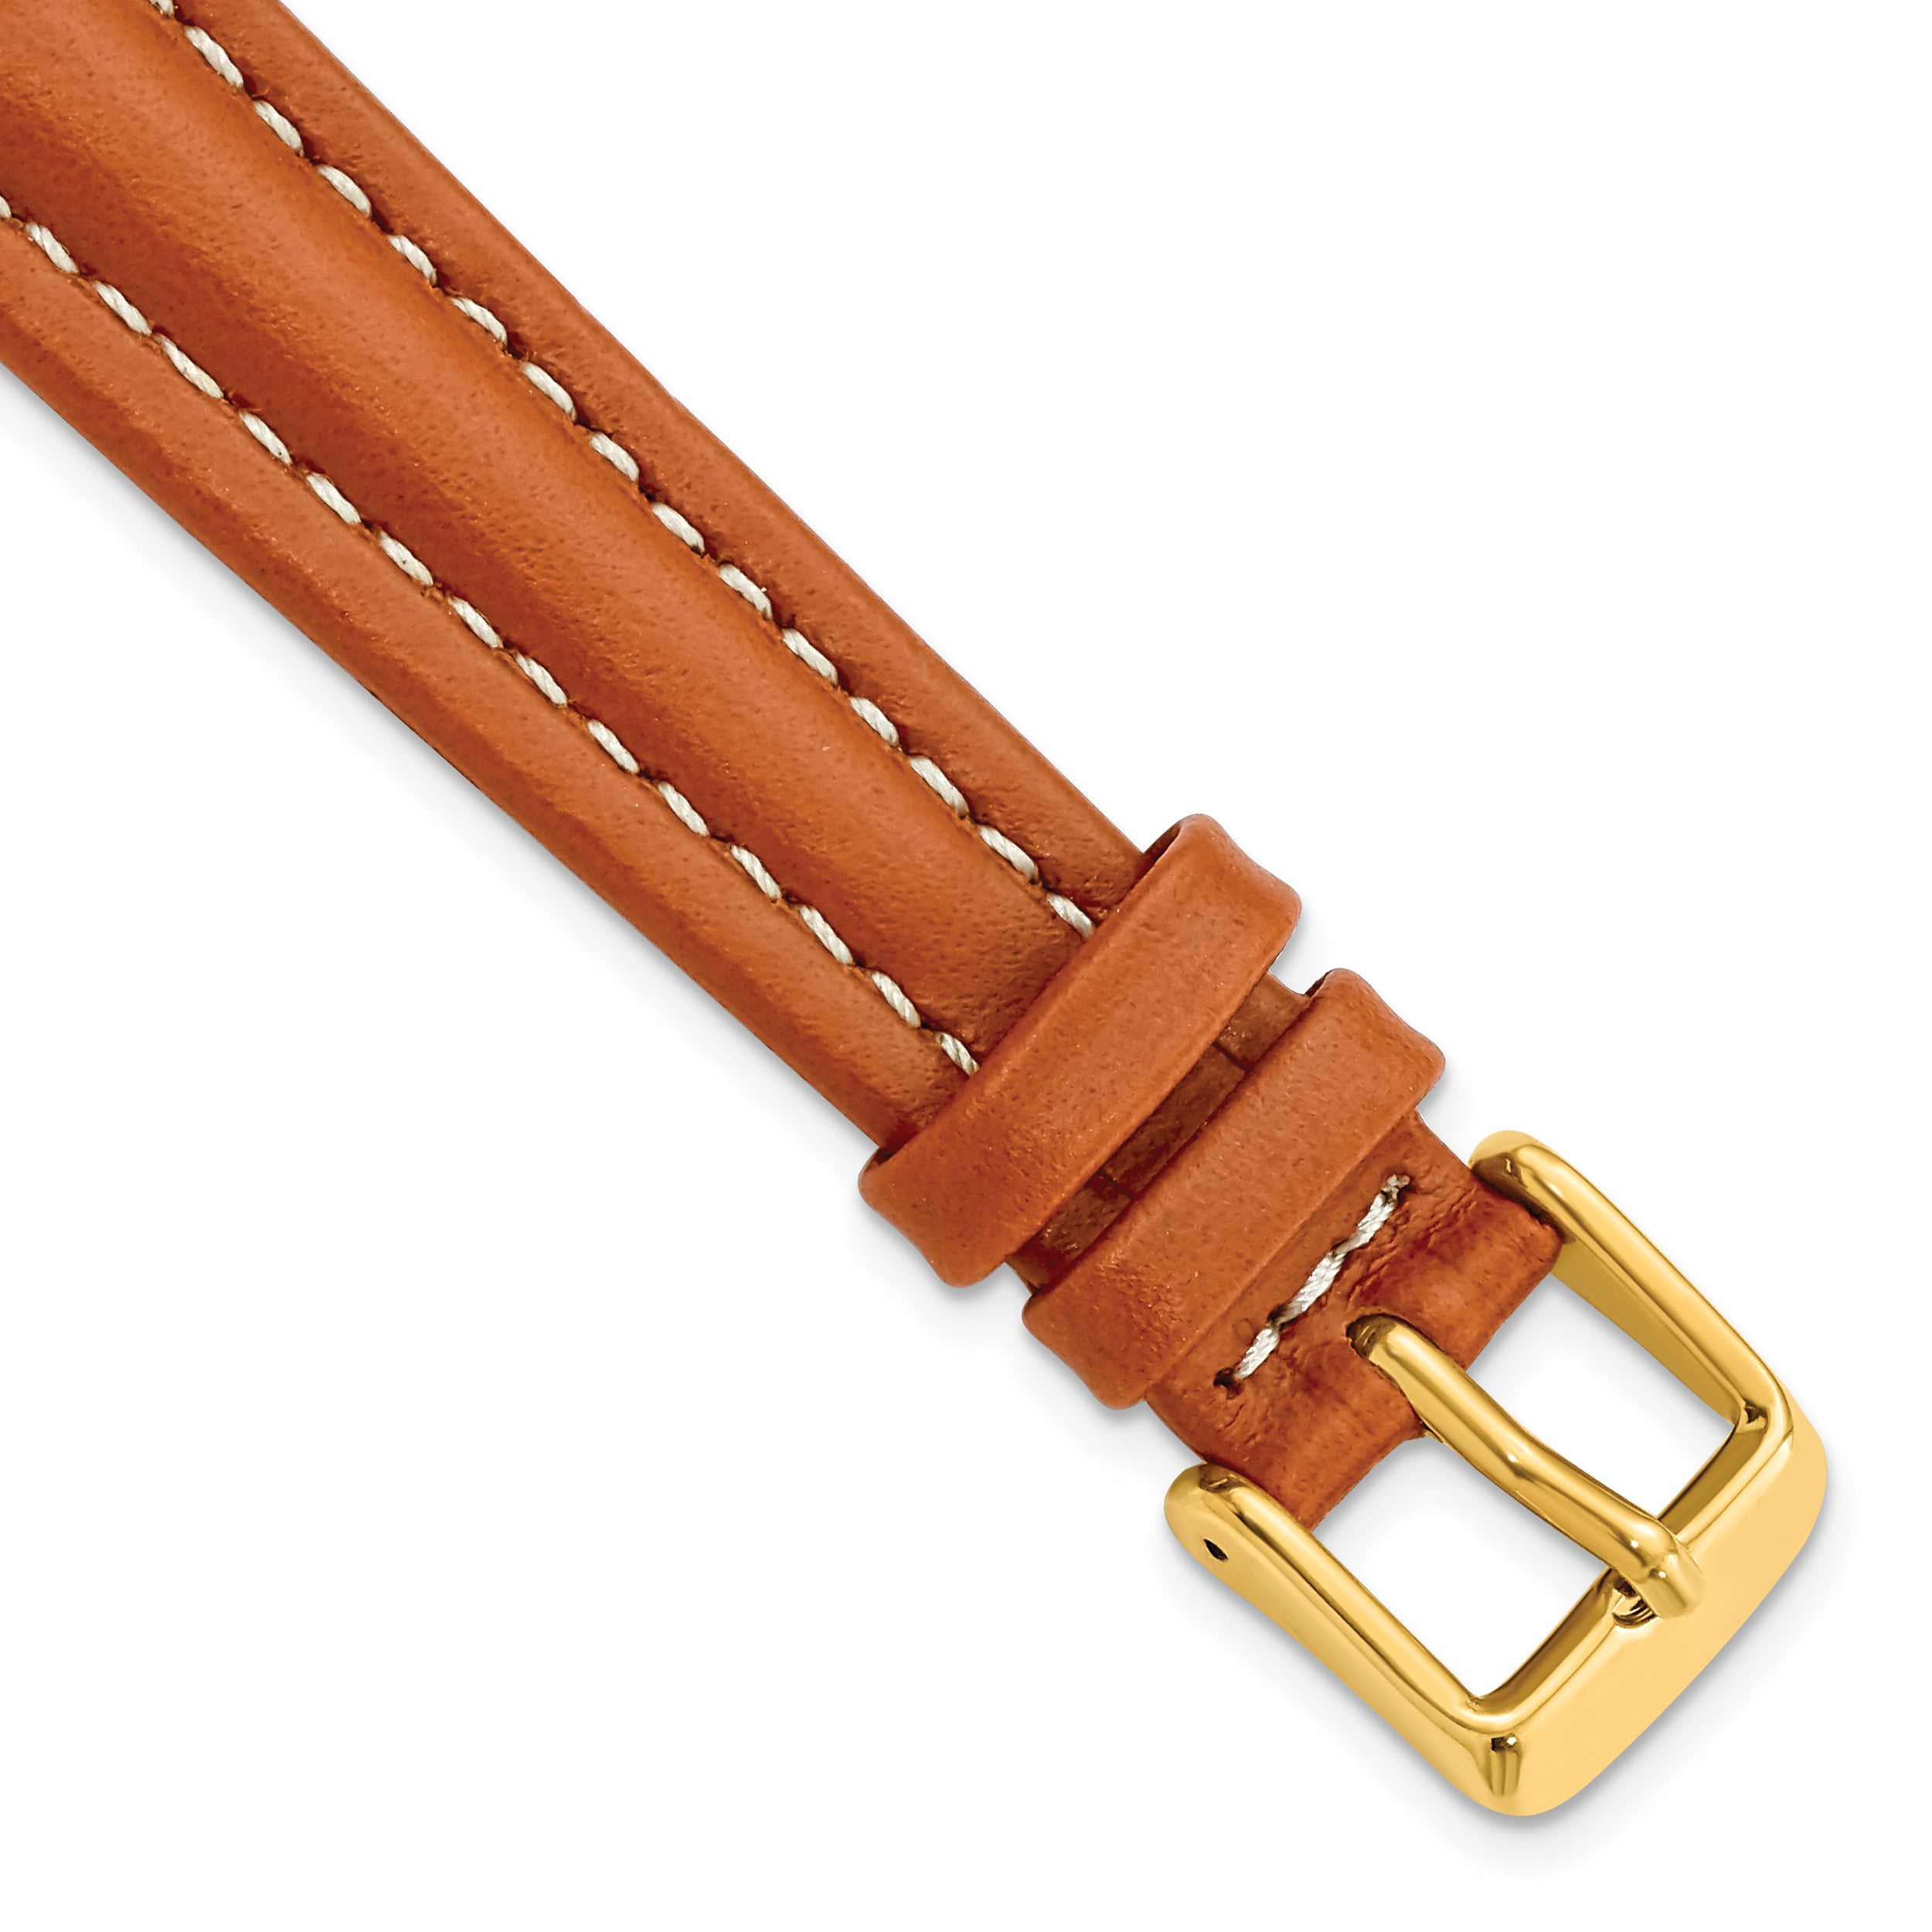 DeBeer 14mm Saddle Brown Oil-tanned Leather with White Stitching and Gold-tone Buckle 6.75 inch Watch Band